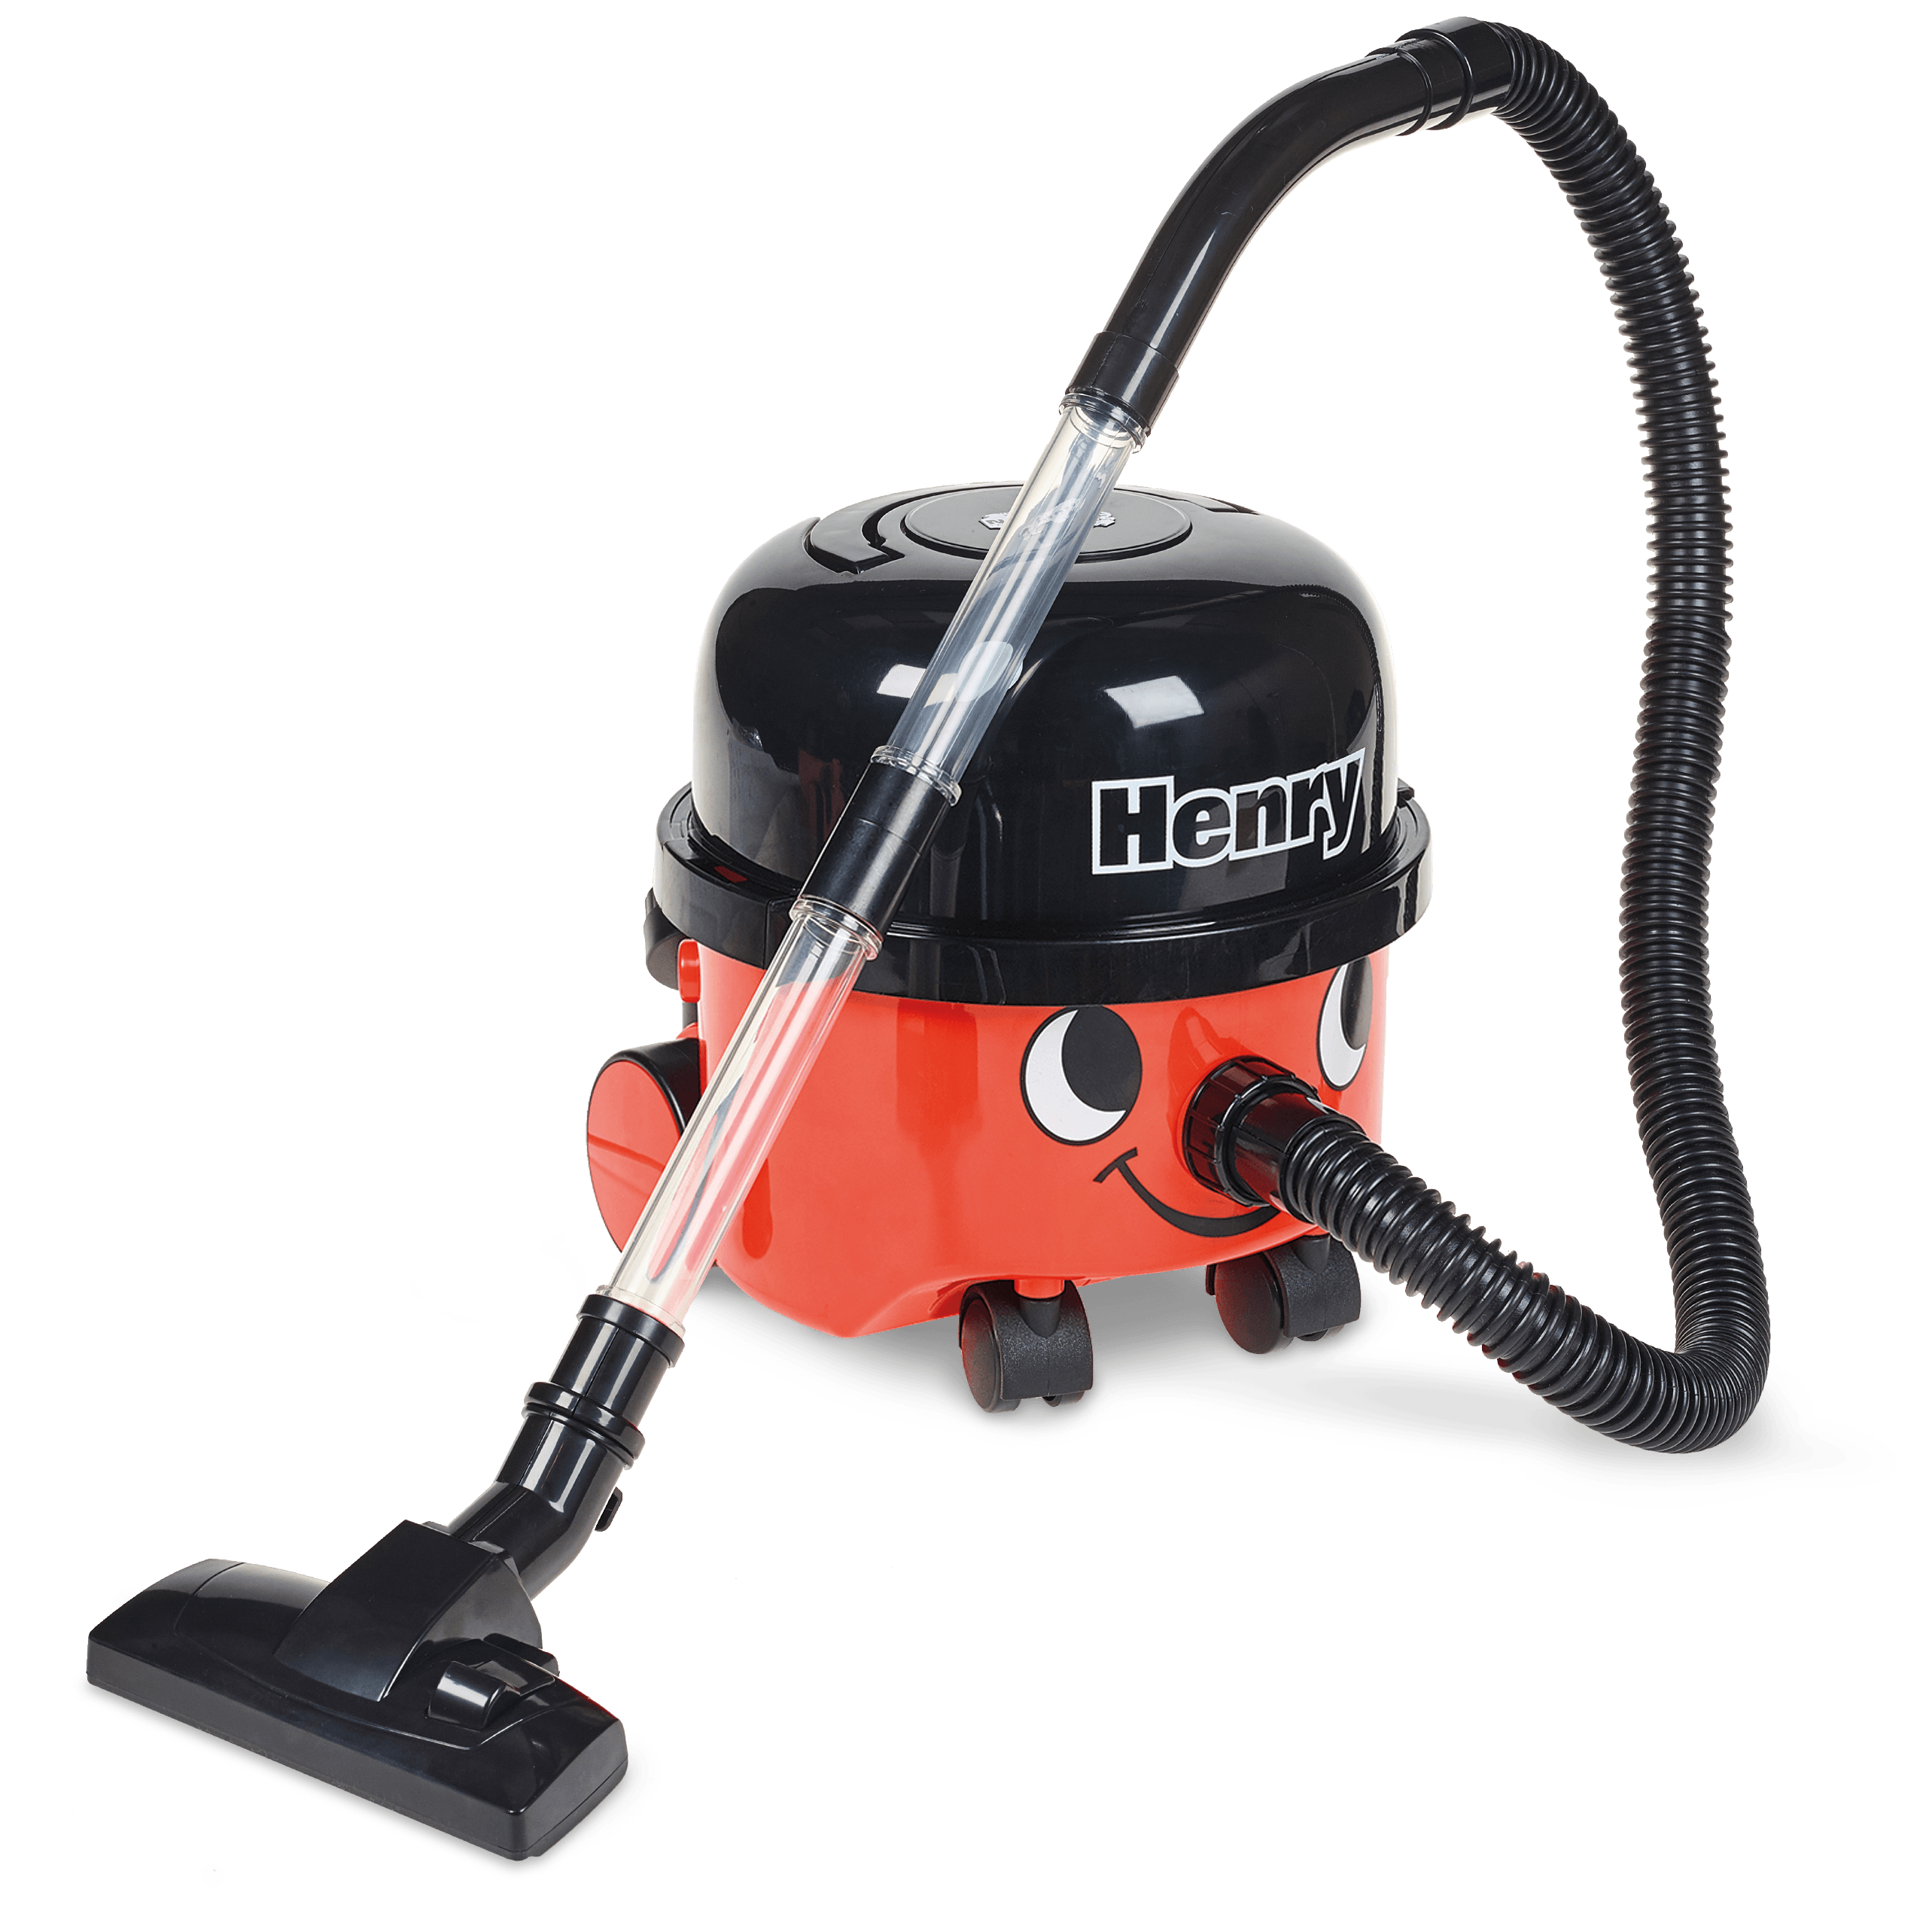 72860_3_Henry_VacuumCleaner_Product_Cuto